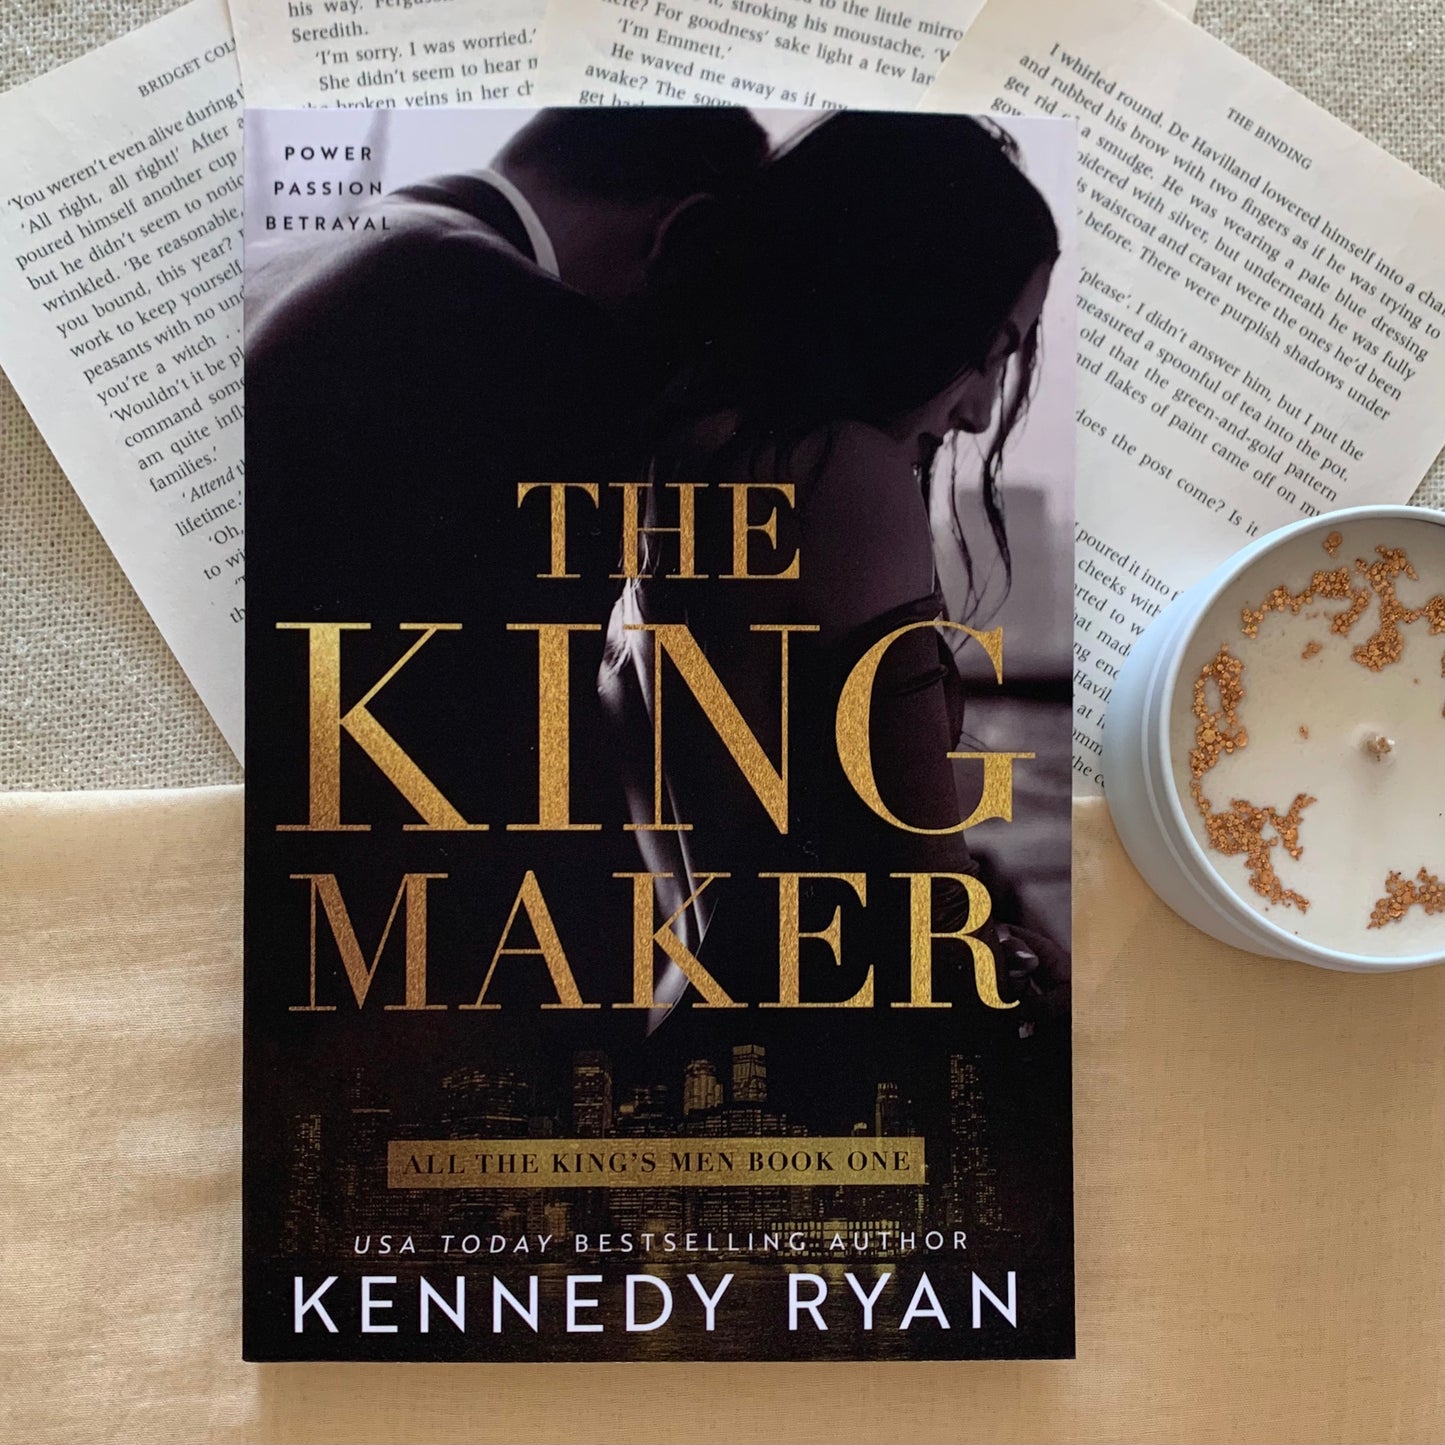 All the King’s Men series by Kennedy Ryan